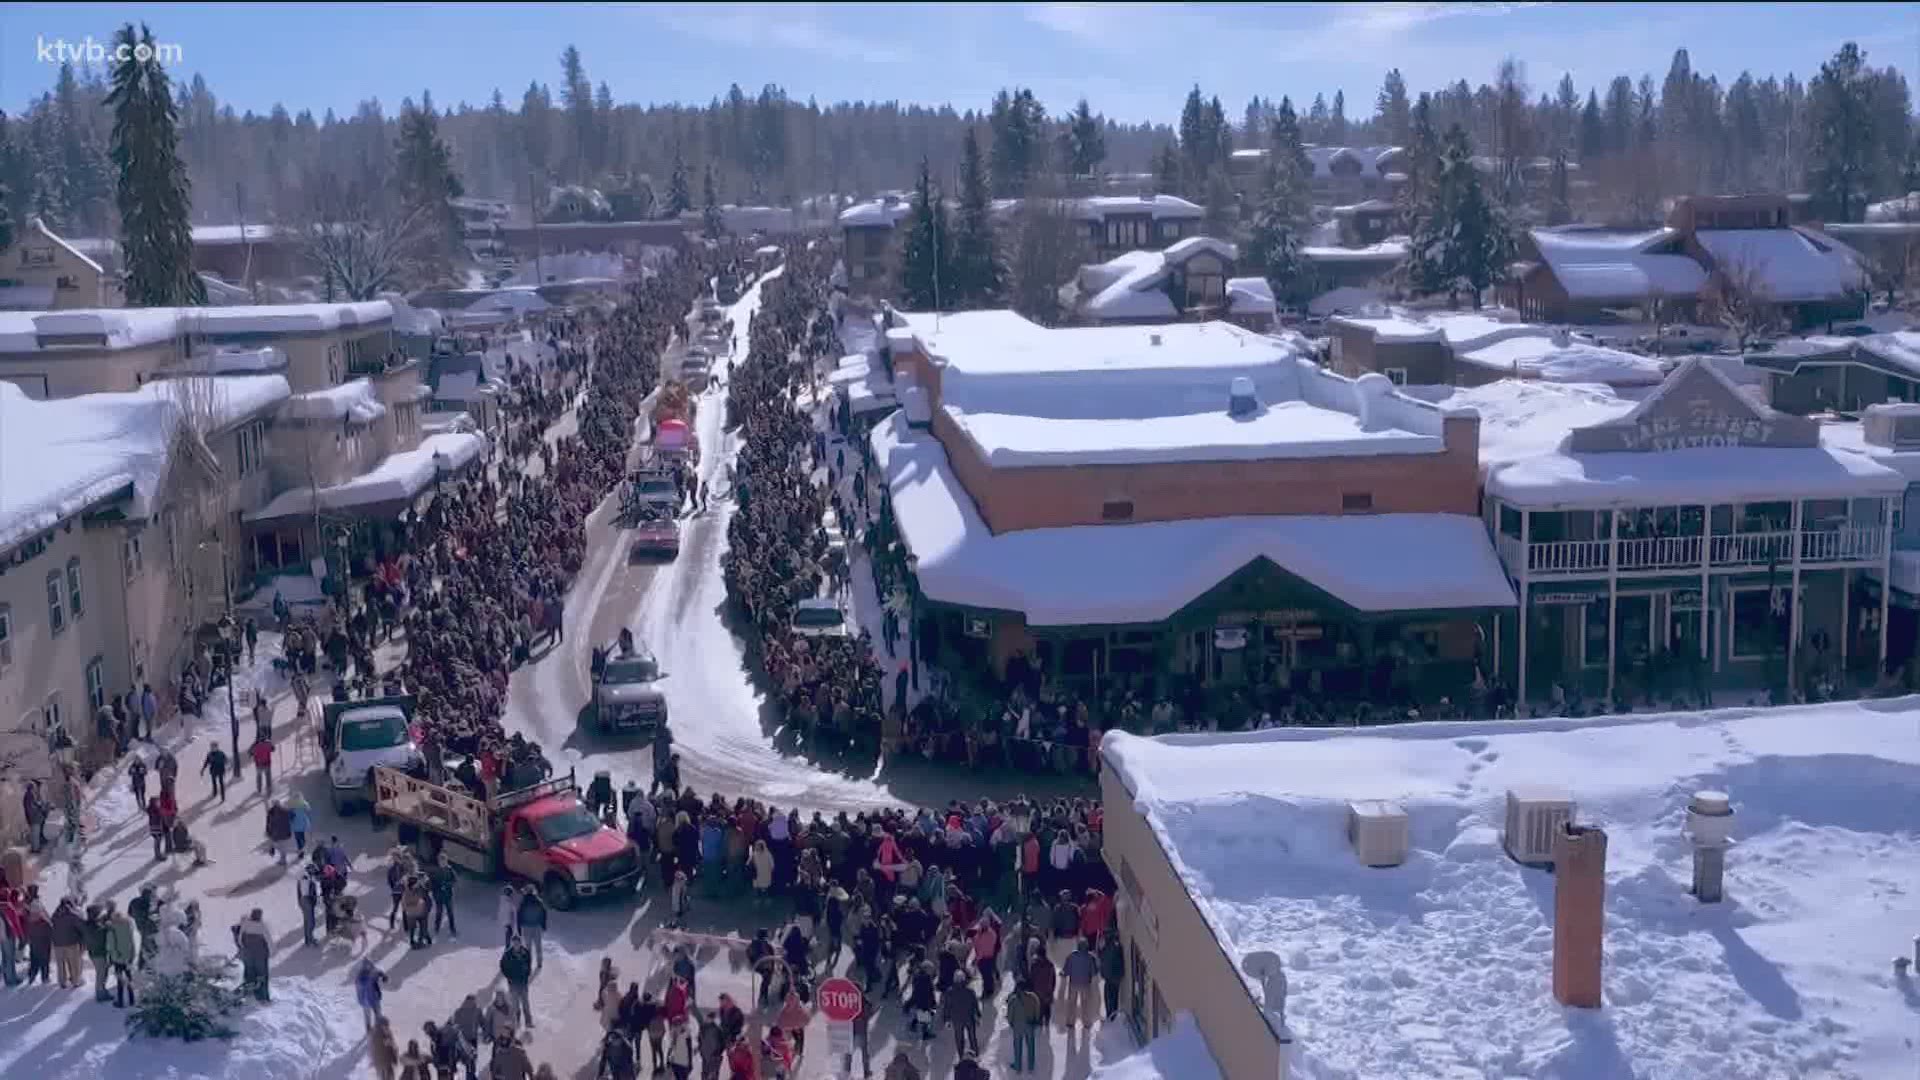 2021 McCall Winter Carnival canceled due to rising COVID19 cases